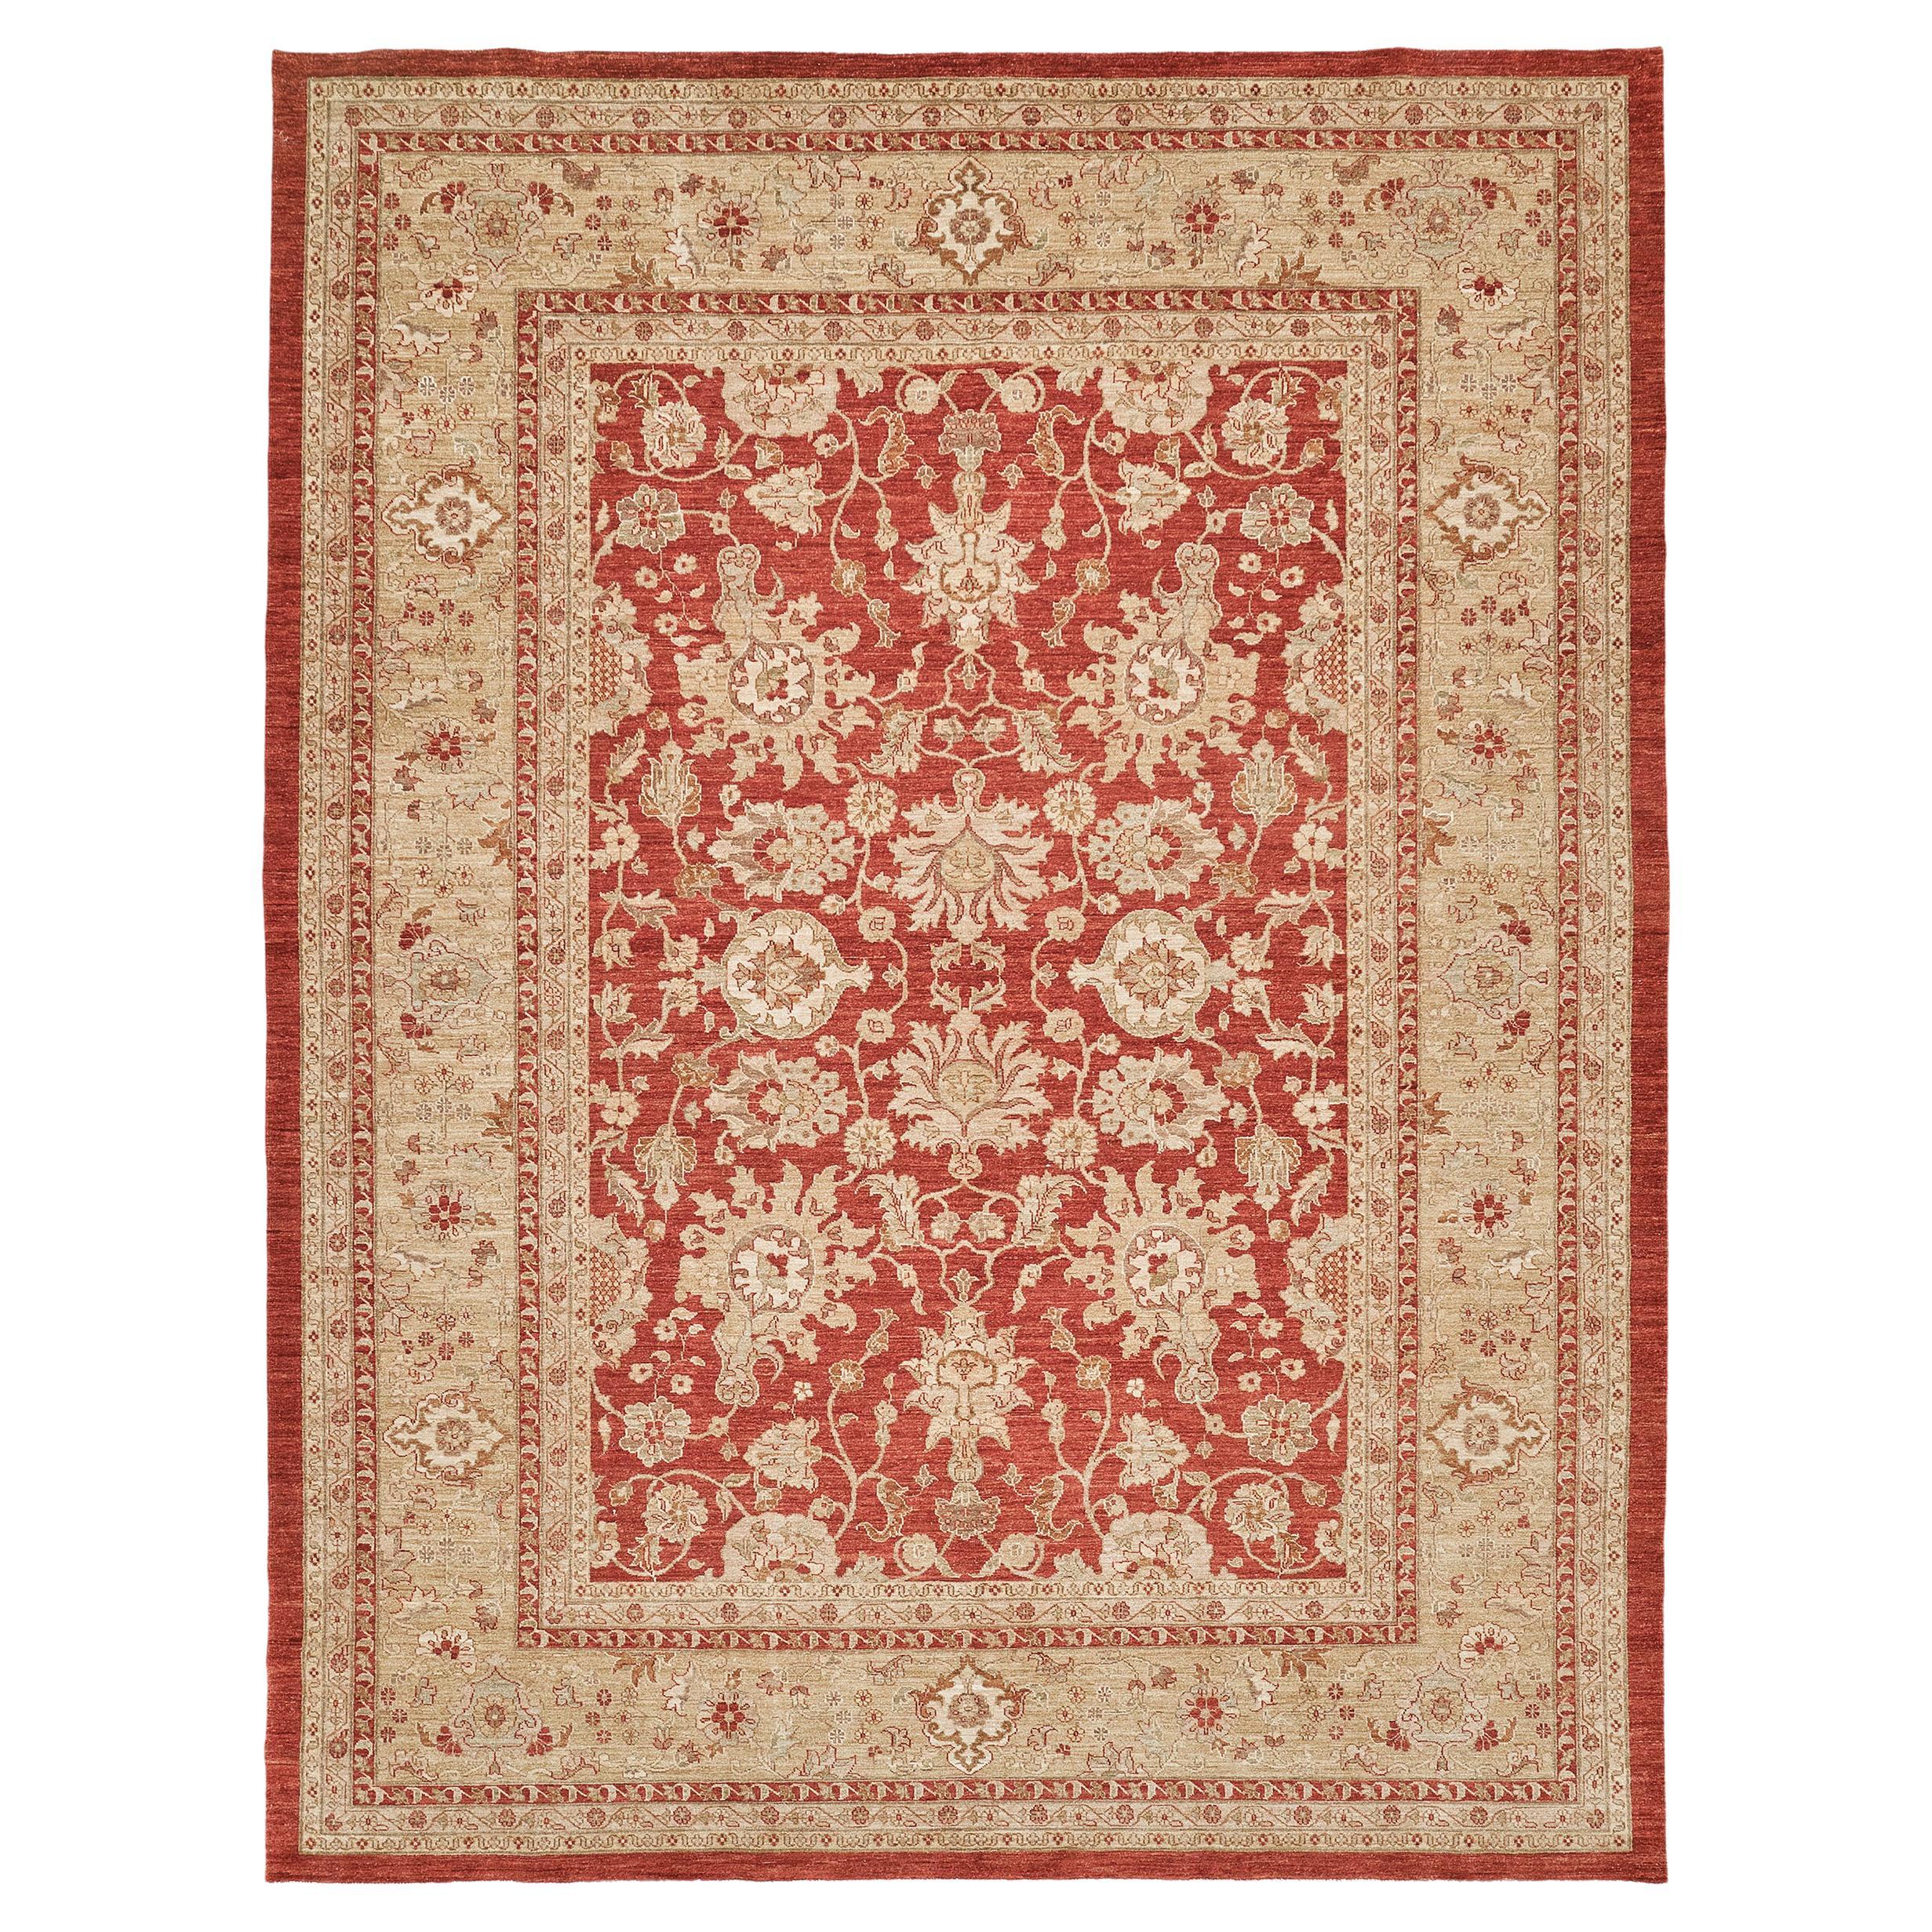 Natural Dye Sultanabad Revival Rug by Mehraban Rugs